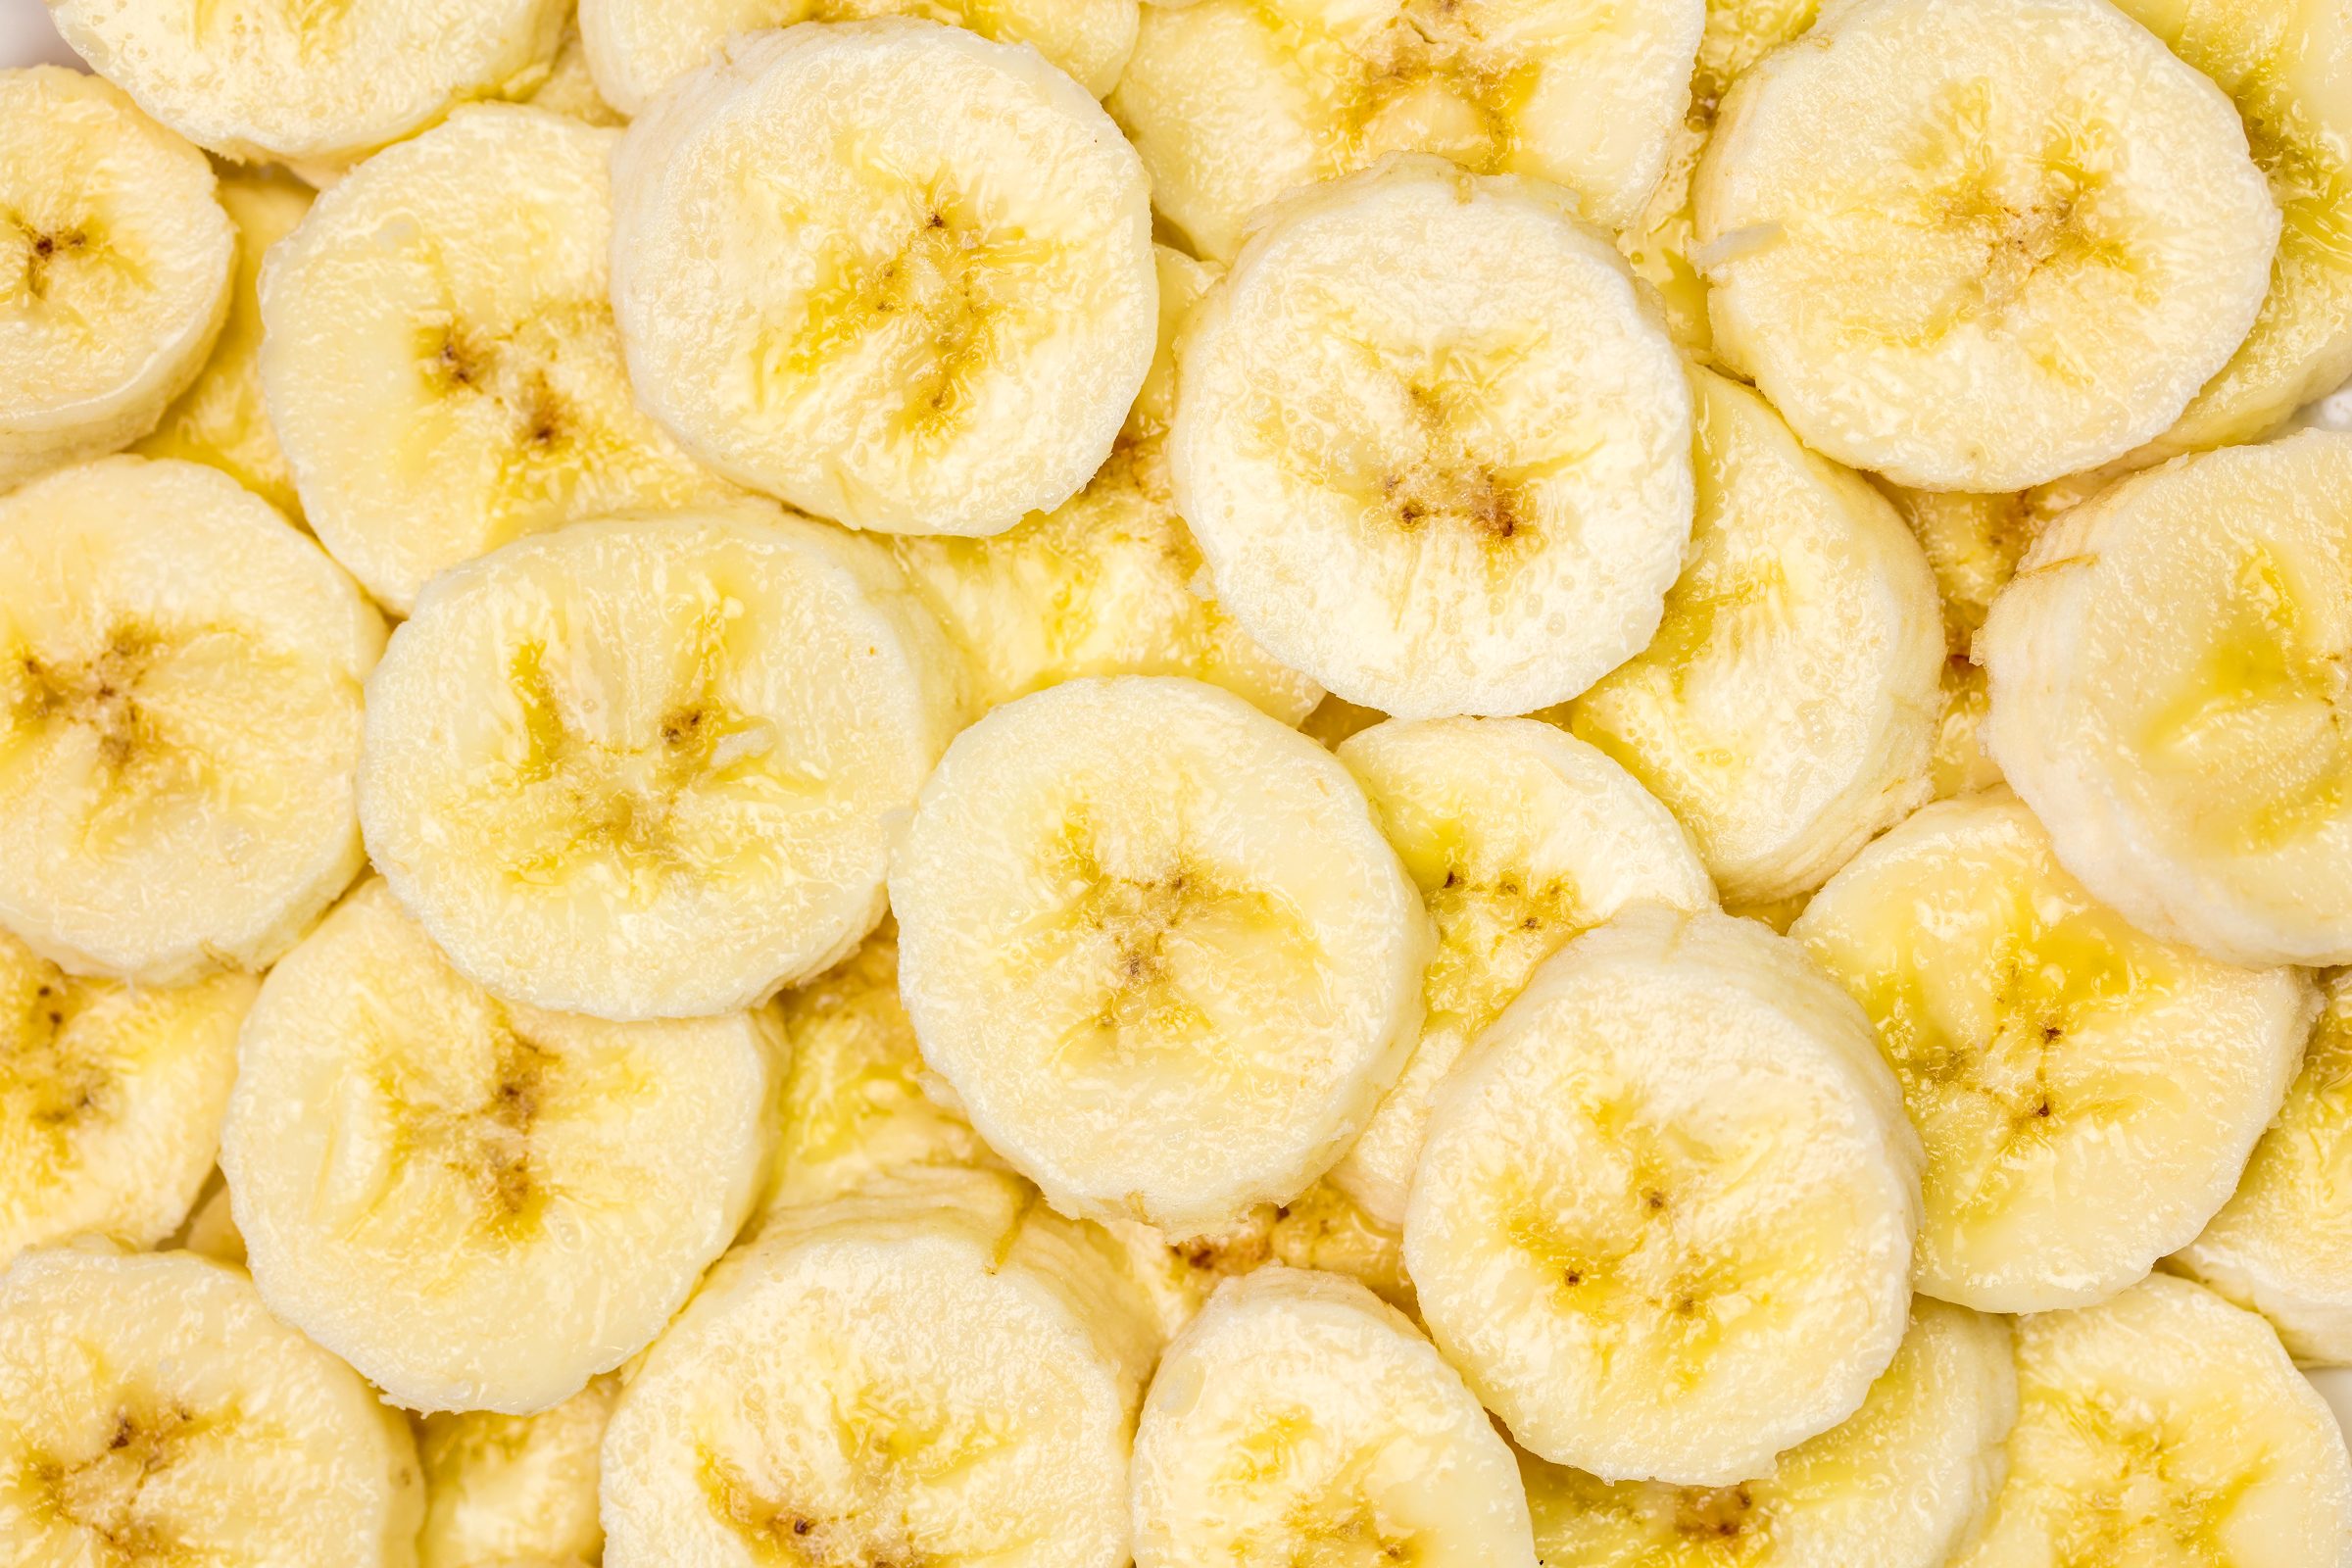 I Ate Bananas Every Day for a Week—Here's What Happened